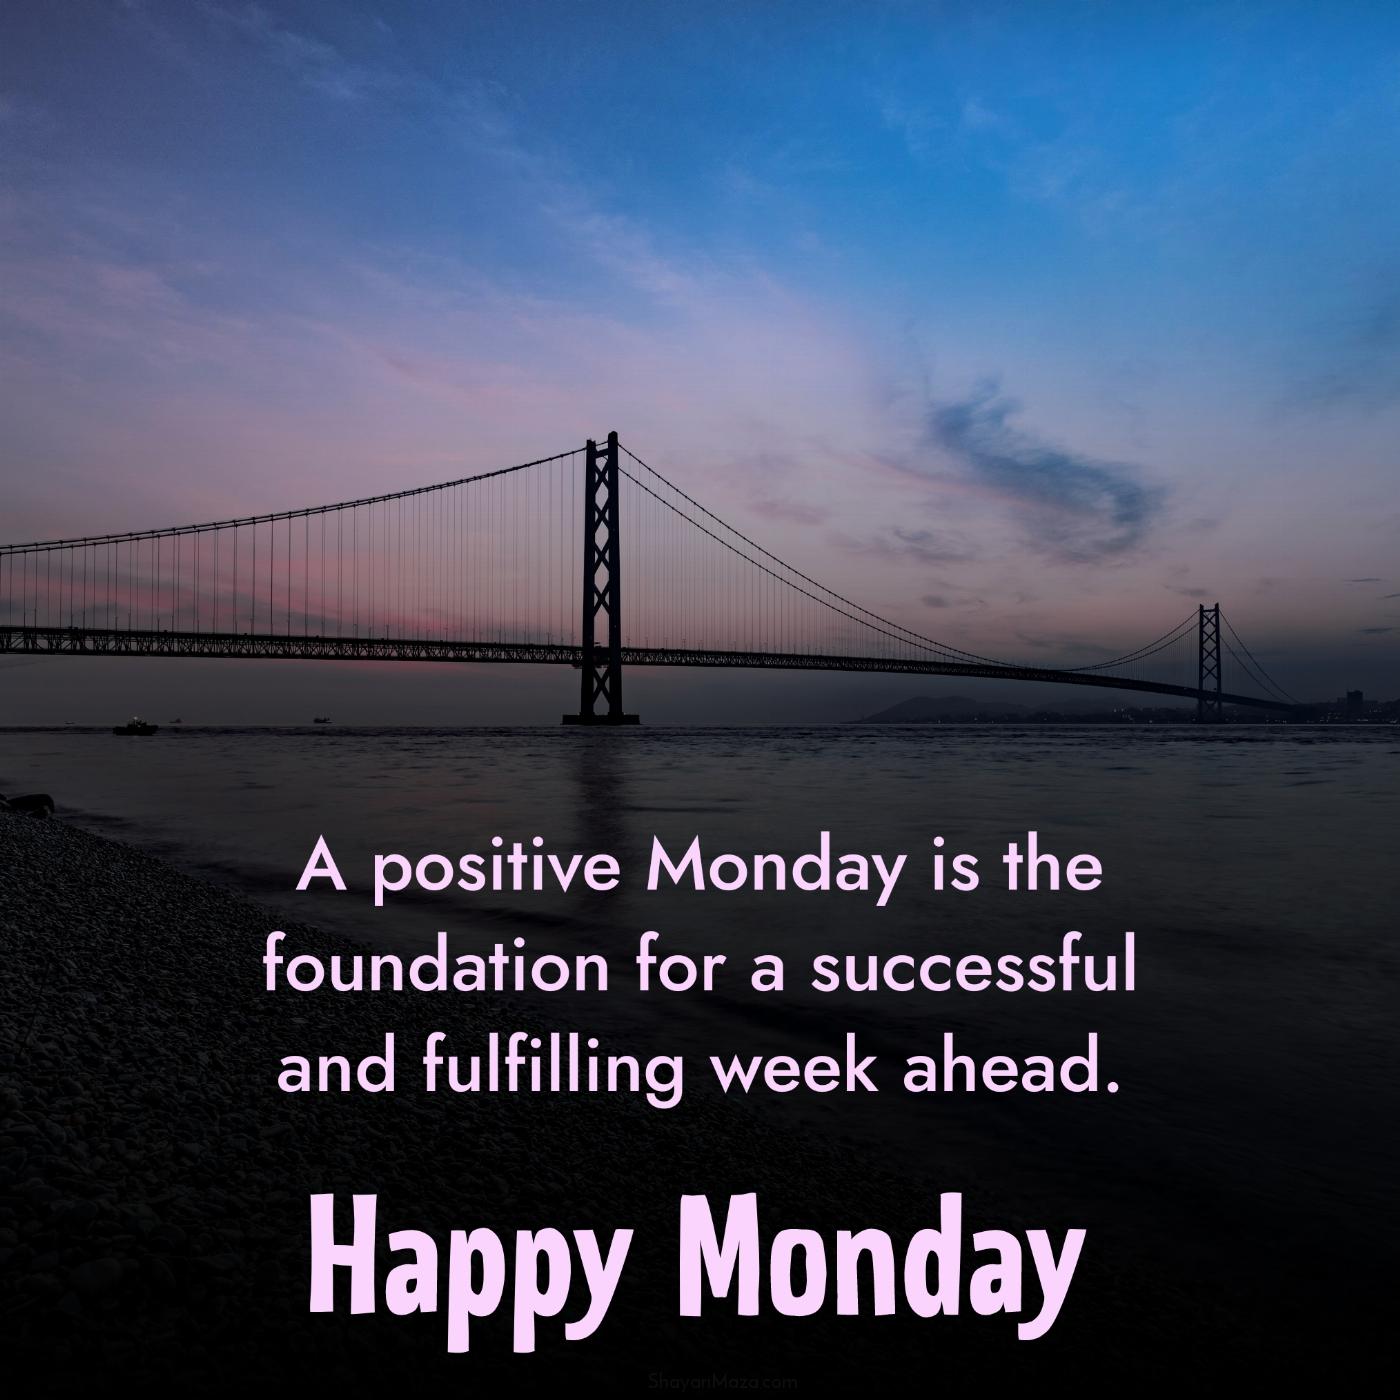 A positive Monday is the foundation for a successful